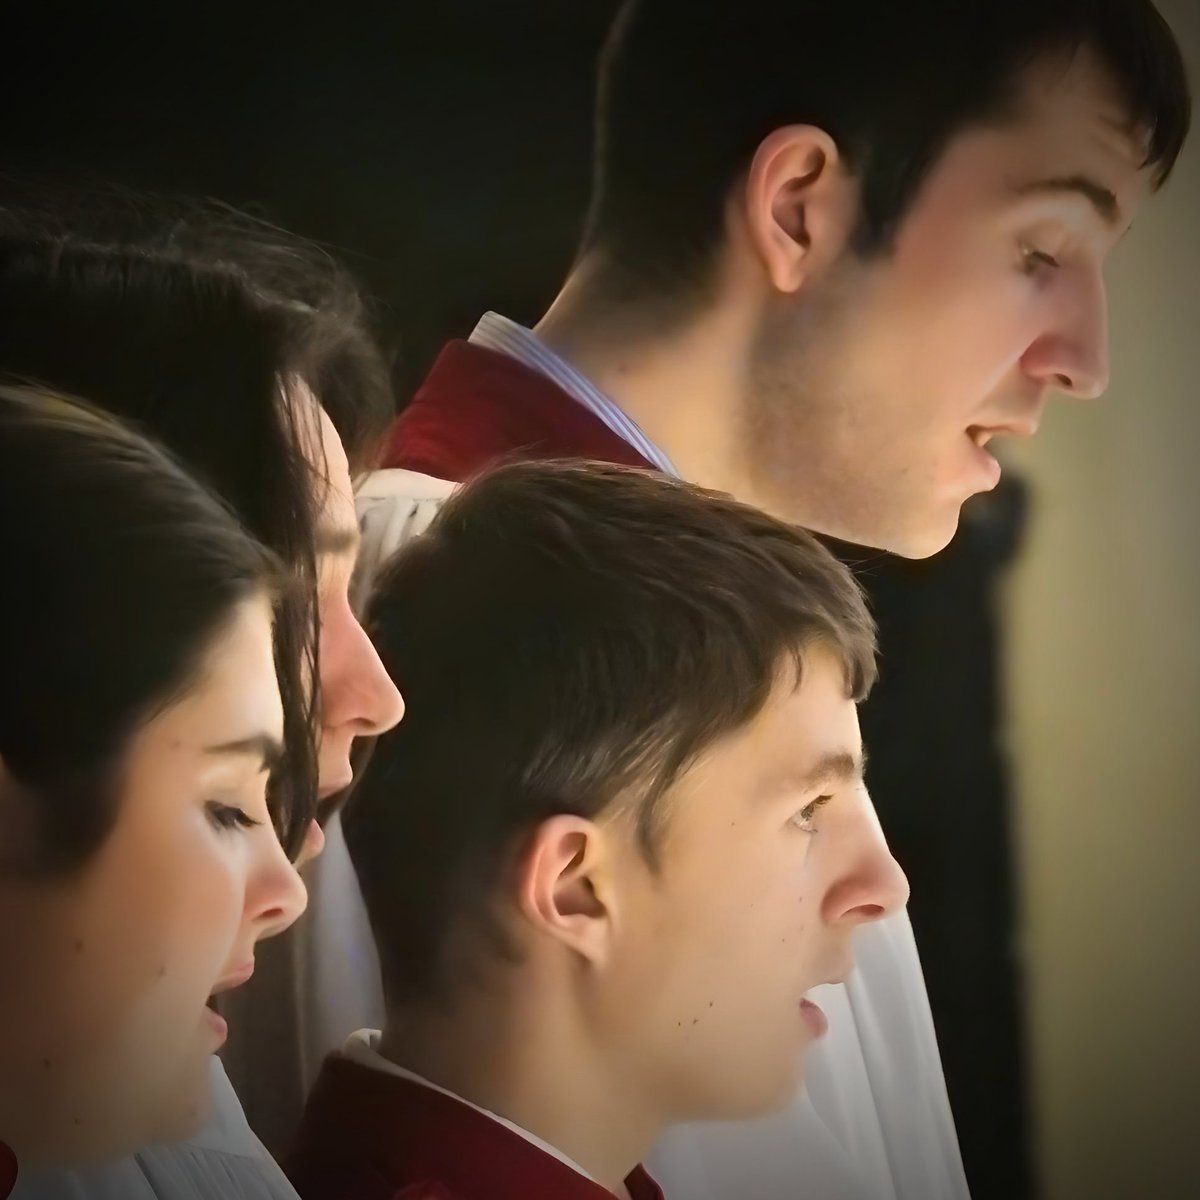 All are welcome to join us for today's service of Choral Evensong, sung at 5.30pm by the Choral Scholars and Songmen of the Cathedral Choir. Ayleward Responses Psalm 128 Halsey Stanford in C Exultate justi Viadana